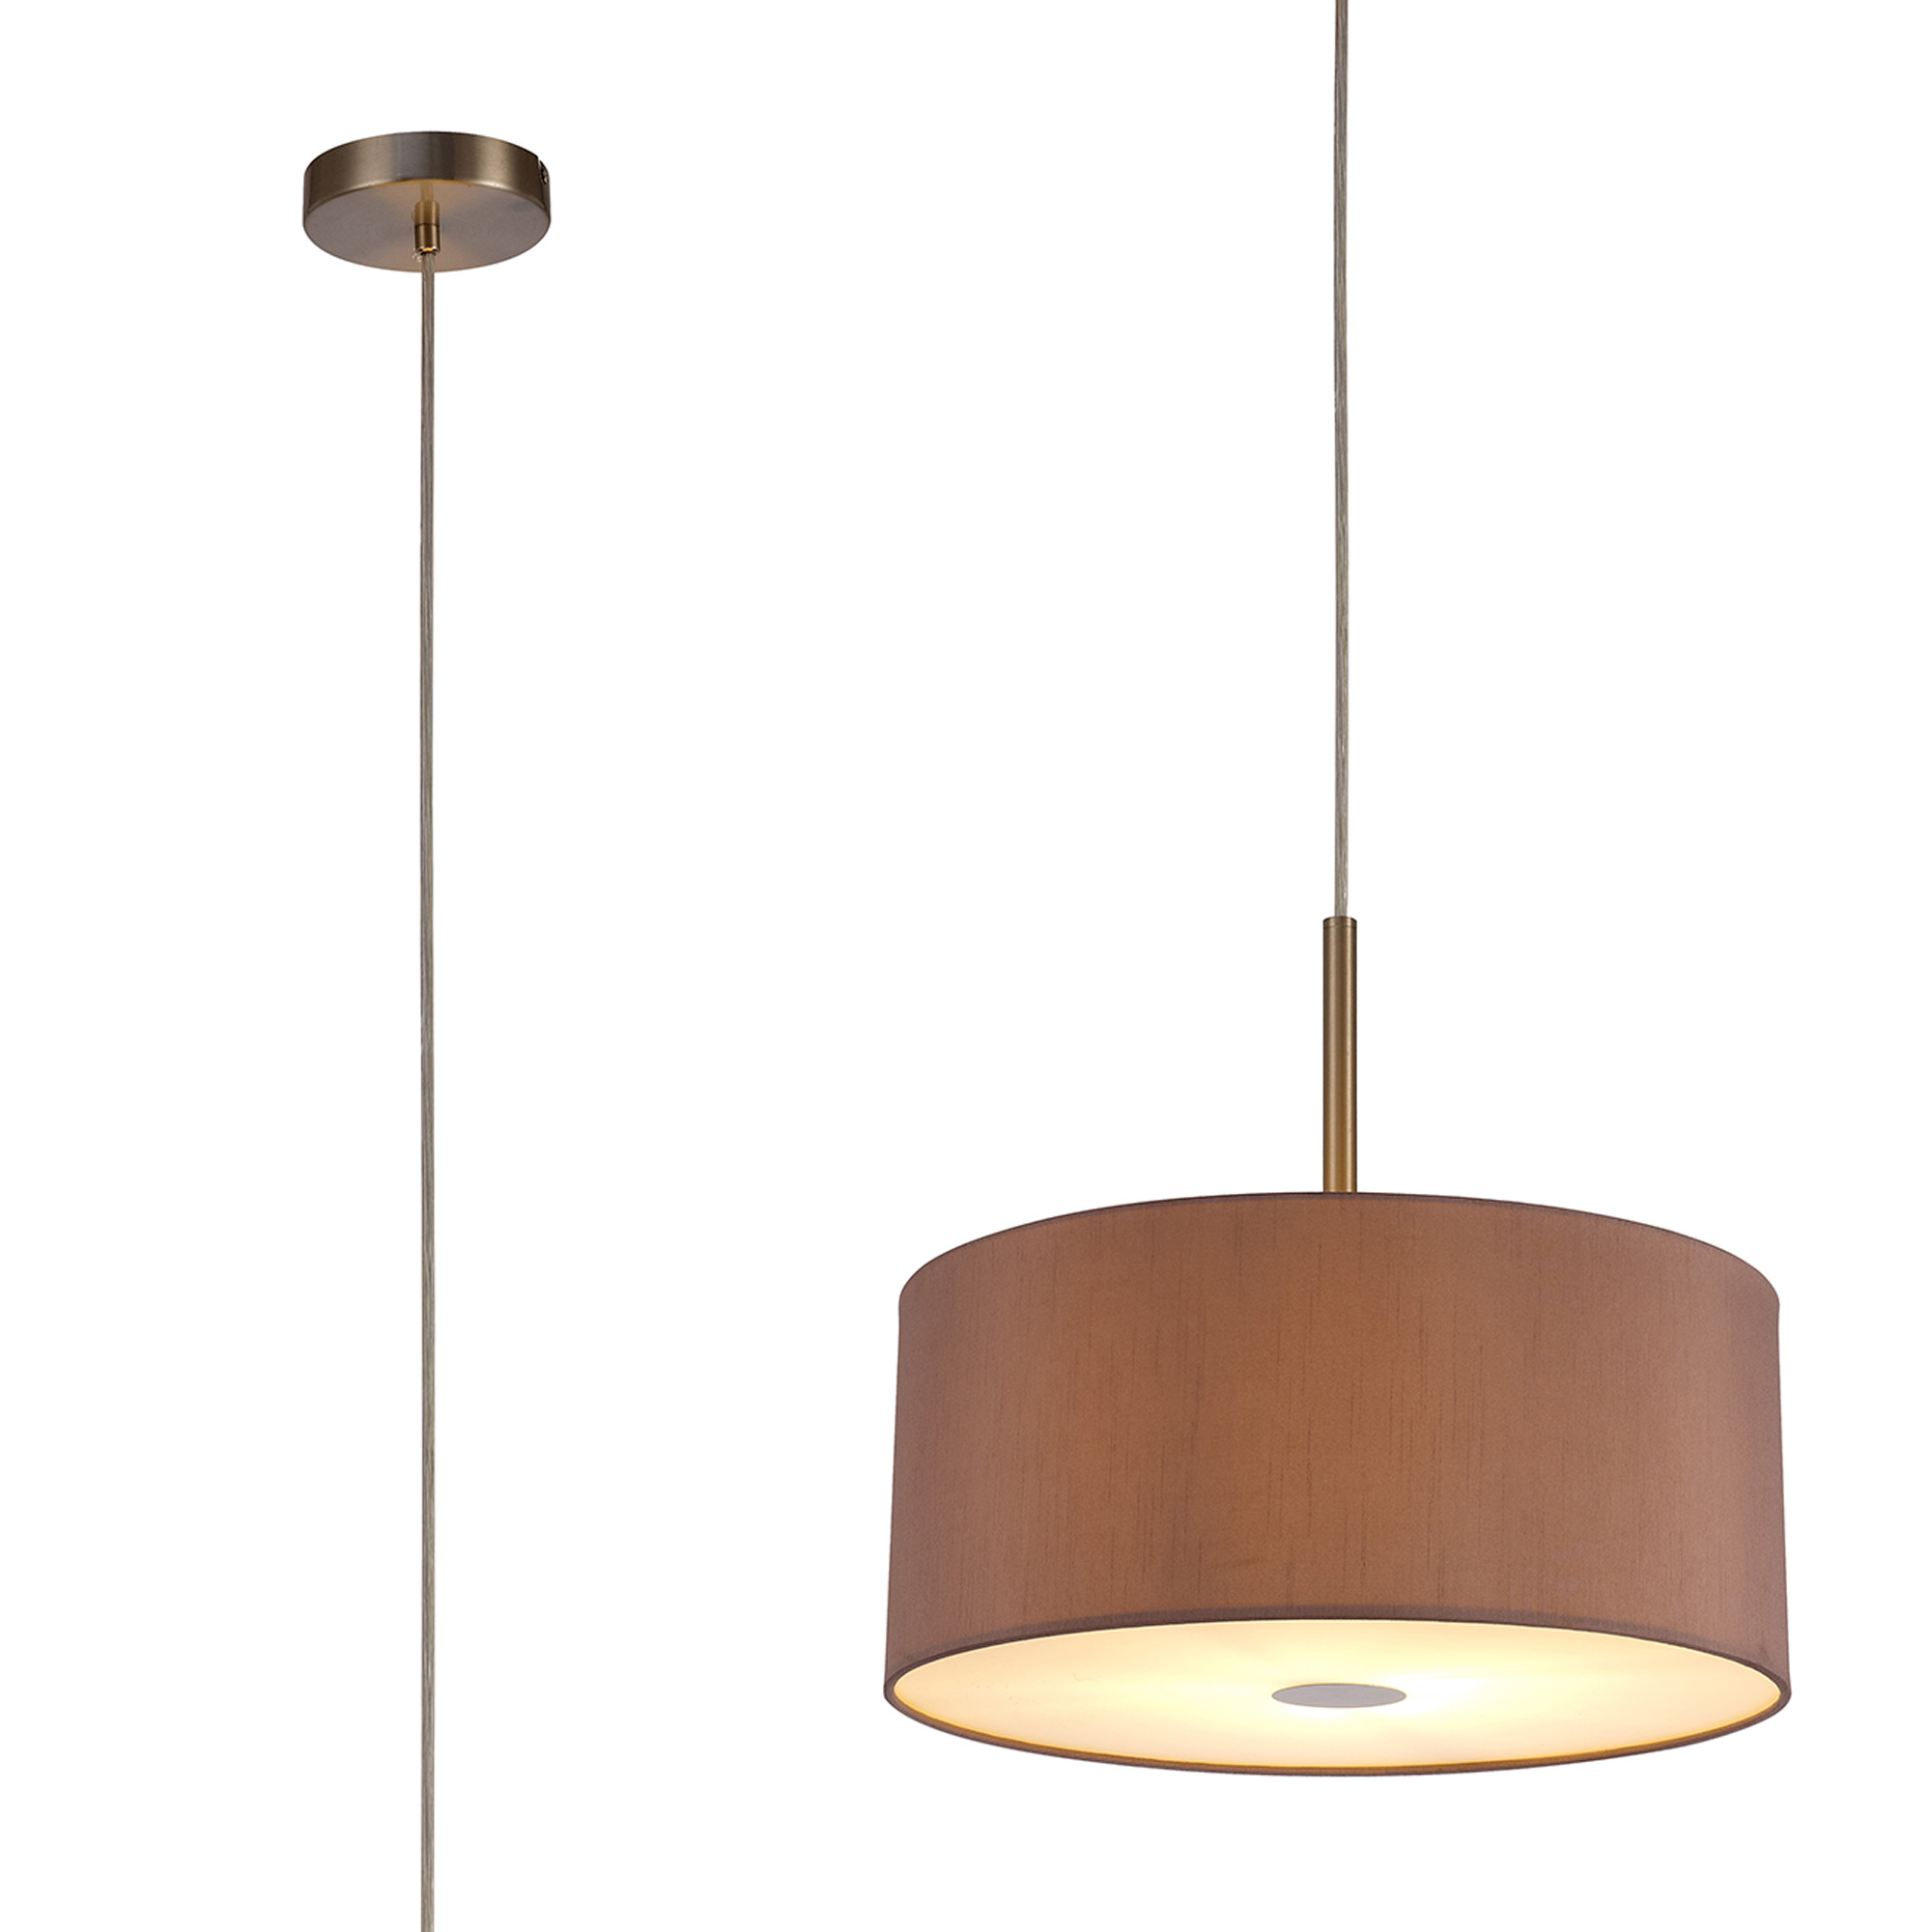 DK0297  Baymont 40cm Pendant 1 Light Satin Nickel;; Frosted DiffuserTaupe/Halo Gold